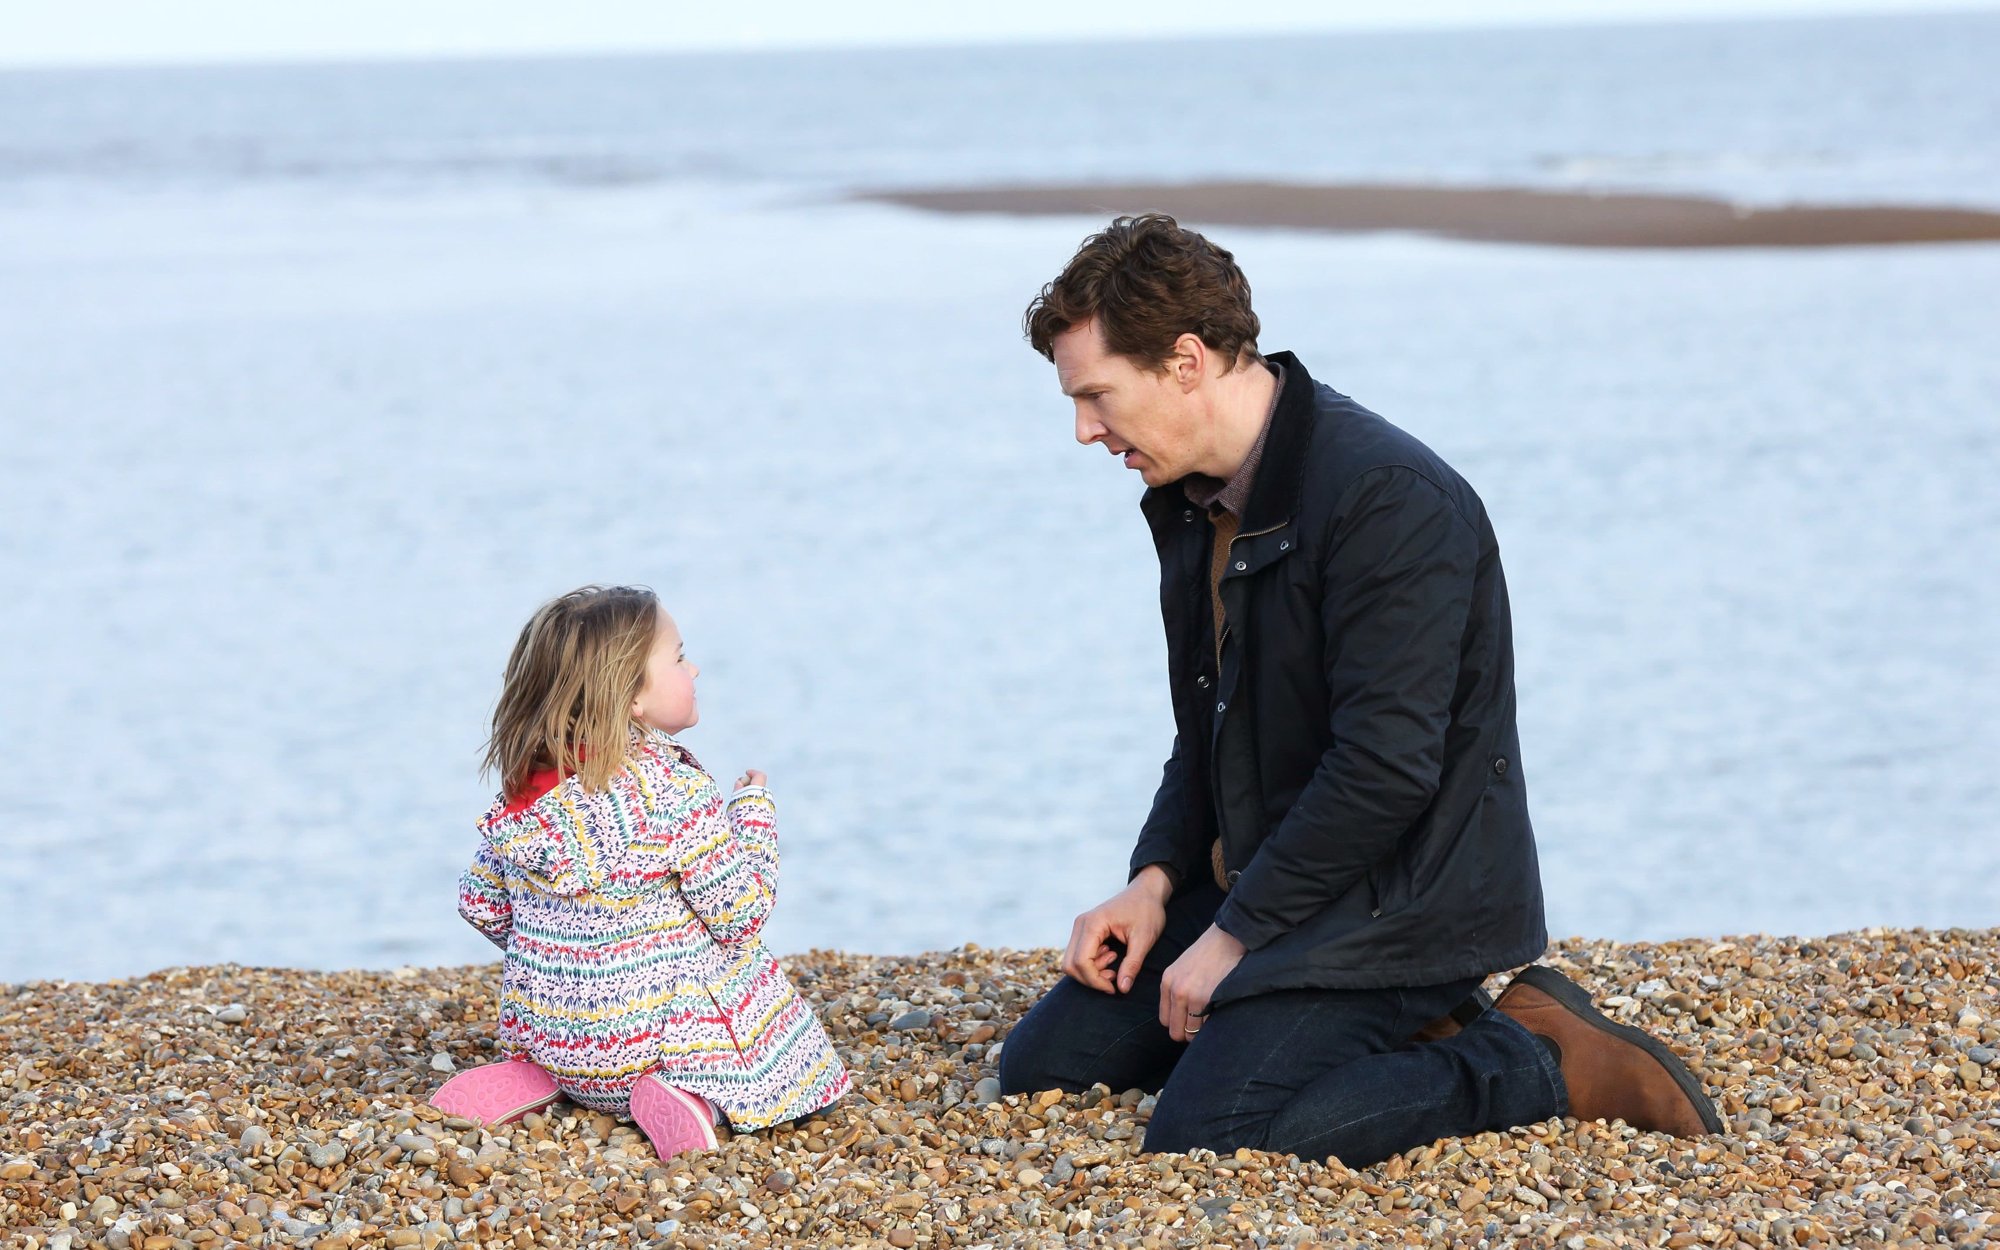 Beatrice White stars as Kate and Benedict Cumberbatch stars as Stephen Lewis in PBS' The Child in Time (2018)